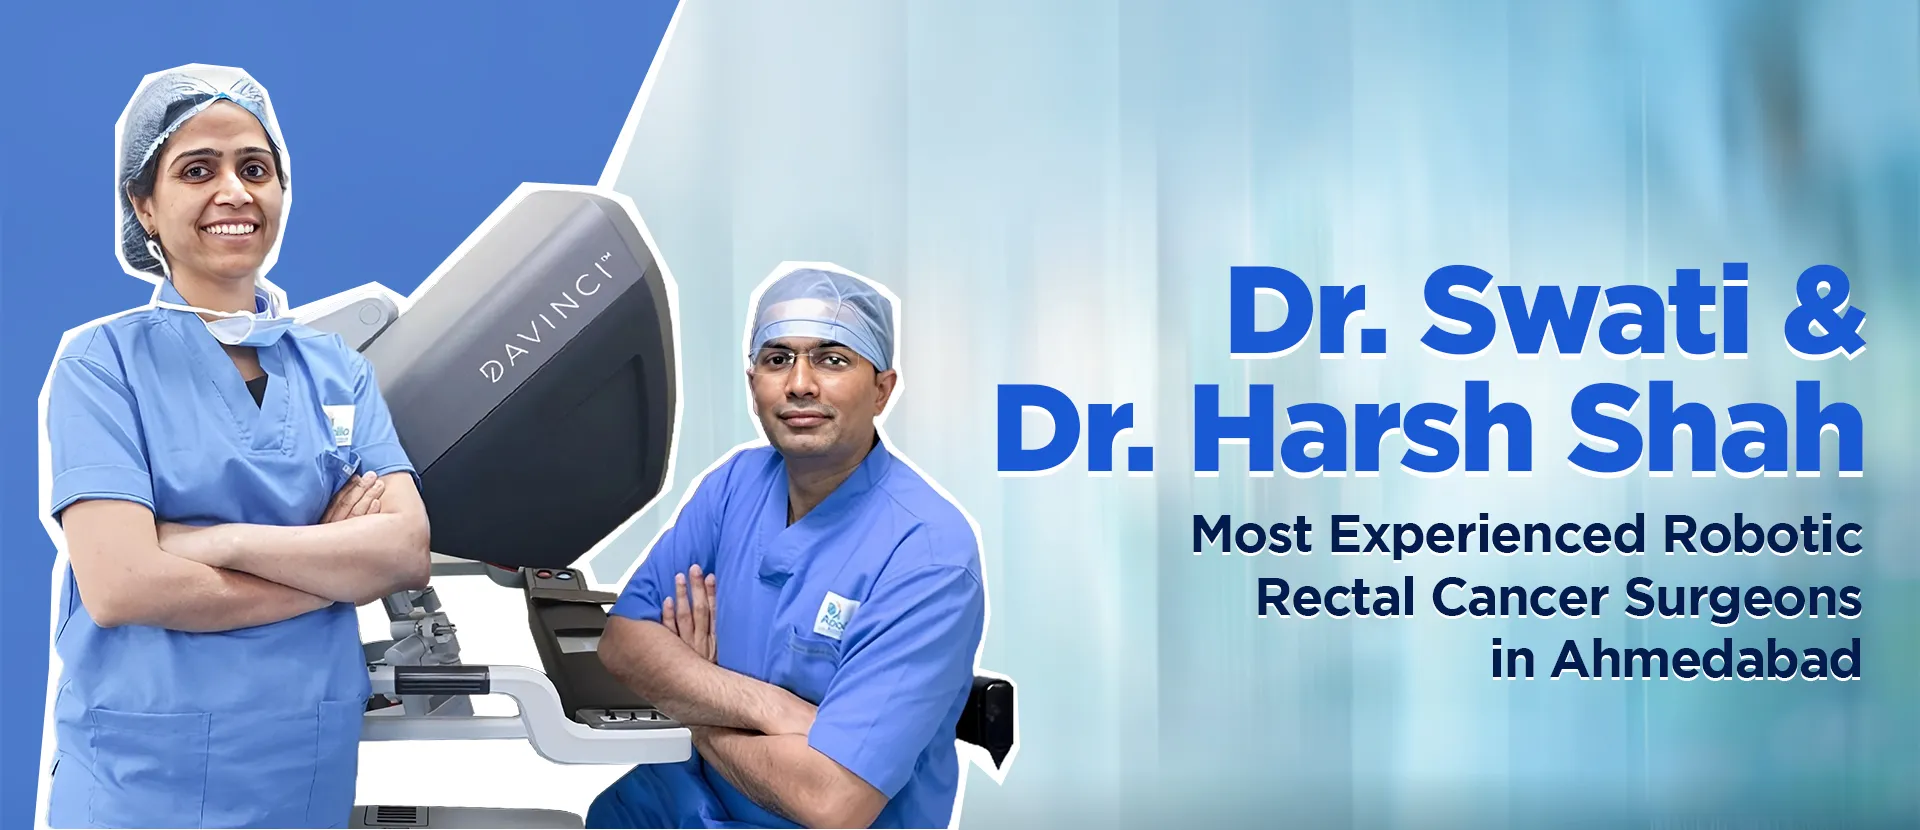 Best Rectal cancer Treatment with Robotic Surgery in Ahmedabad, Gujarat, India